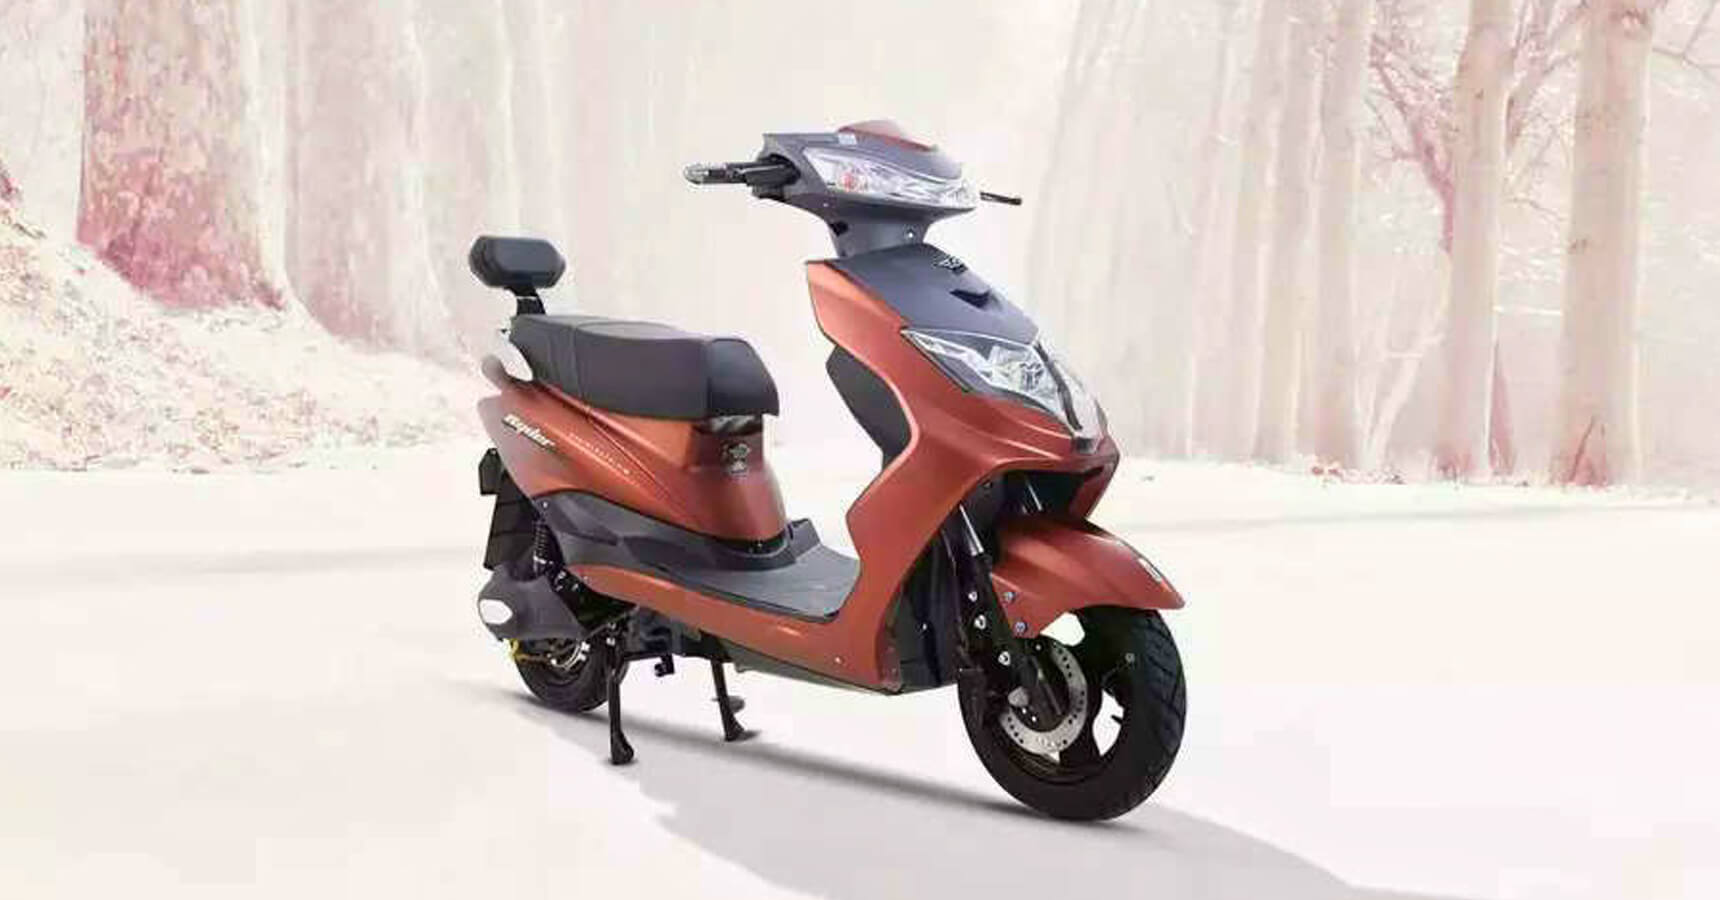 Gemopai Ryder Supermax E-Scooter Launched in India